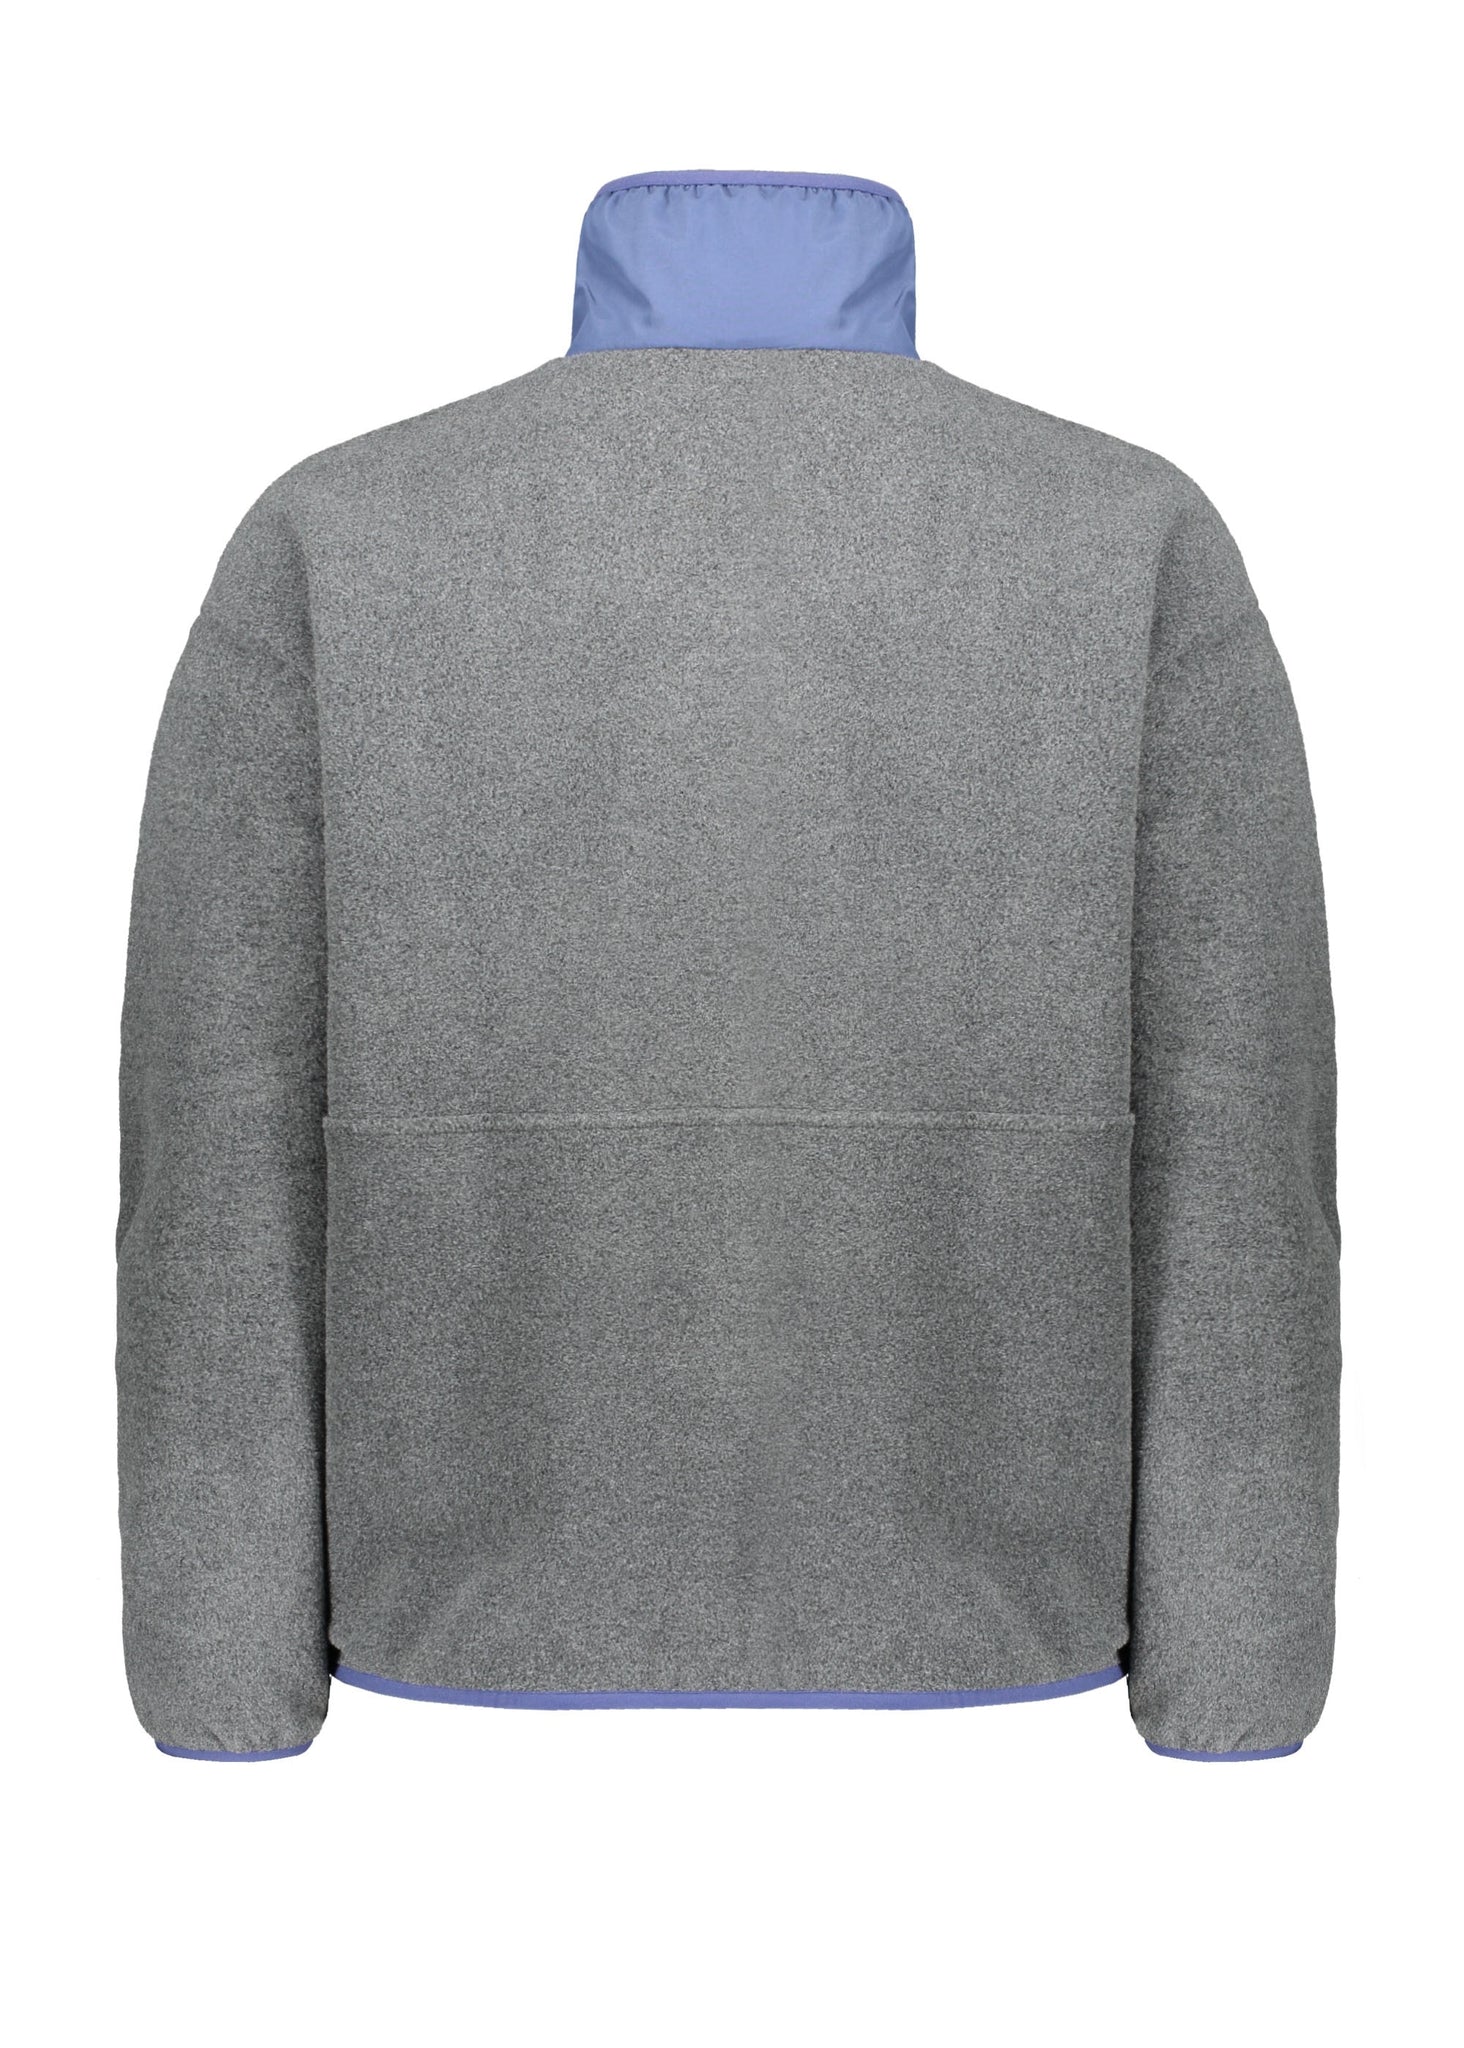 Patagonia Synch Sweat - Nickel